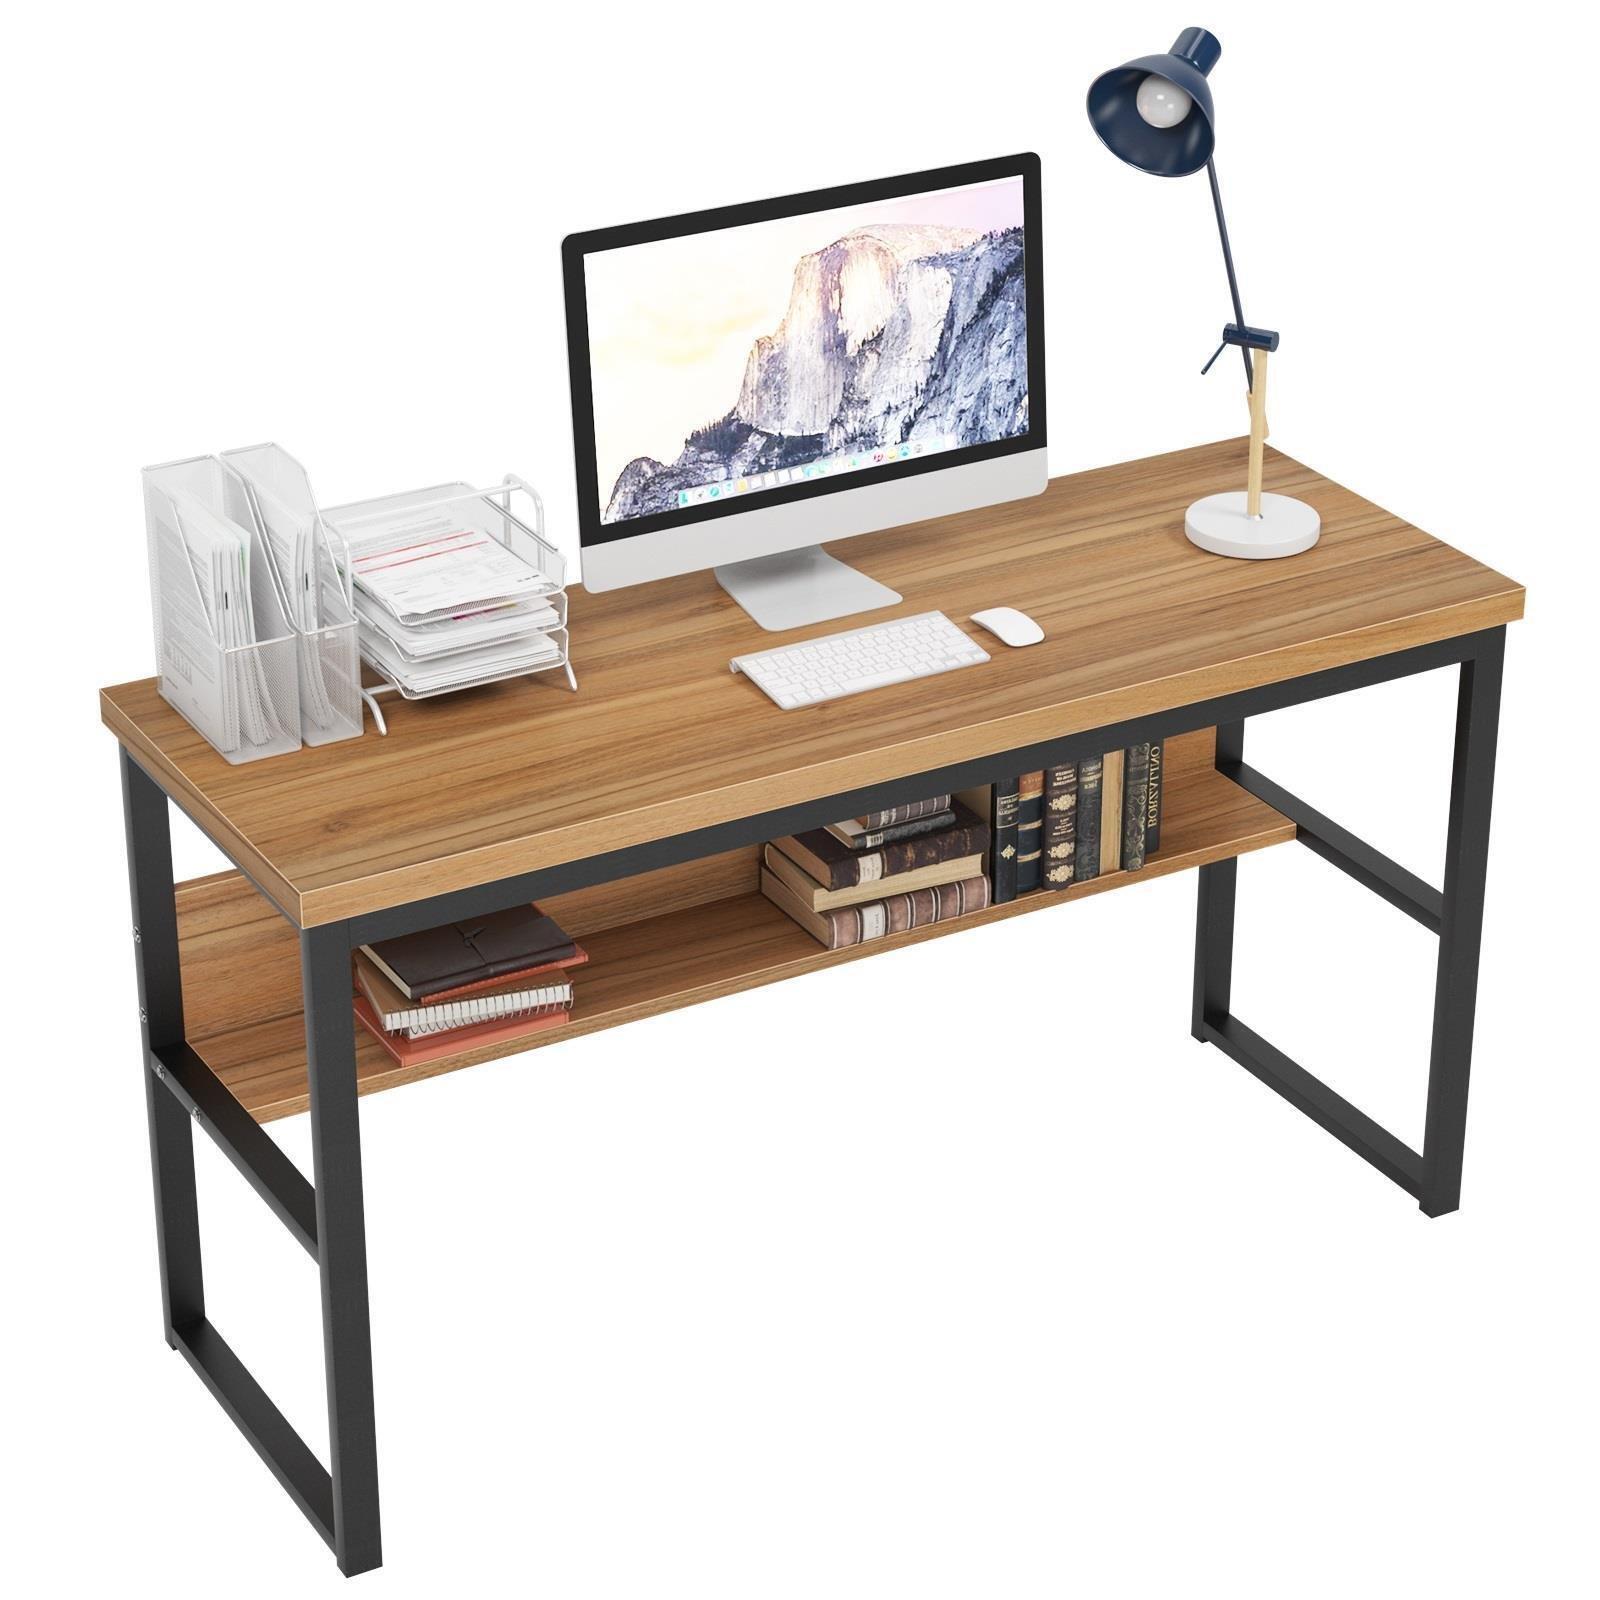 Wooden Metal Oak Computer Table Writing PC Study Desk Workstation With Shelf